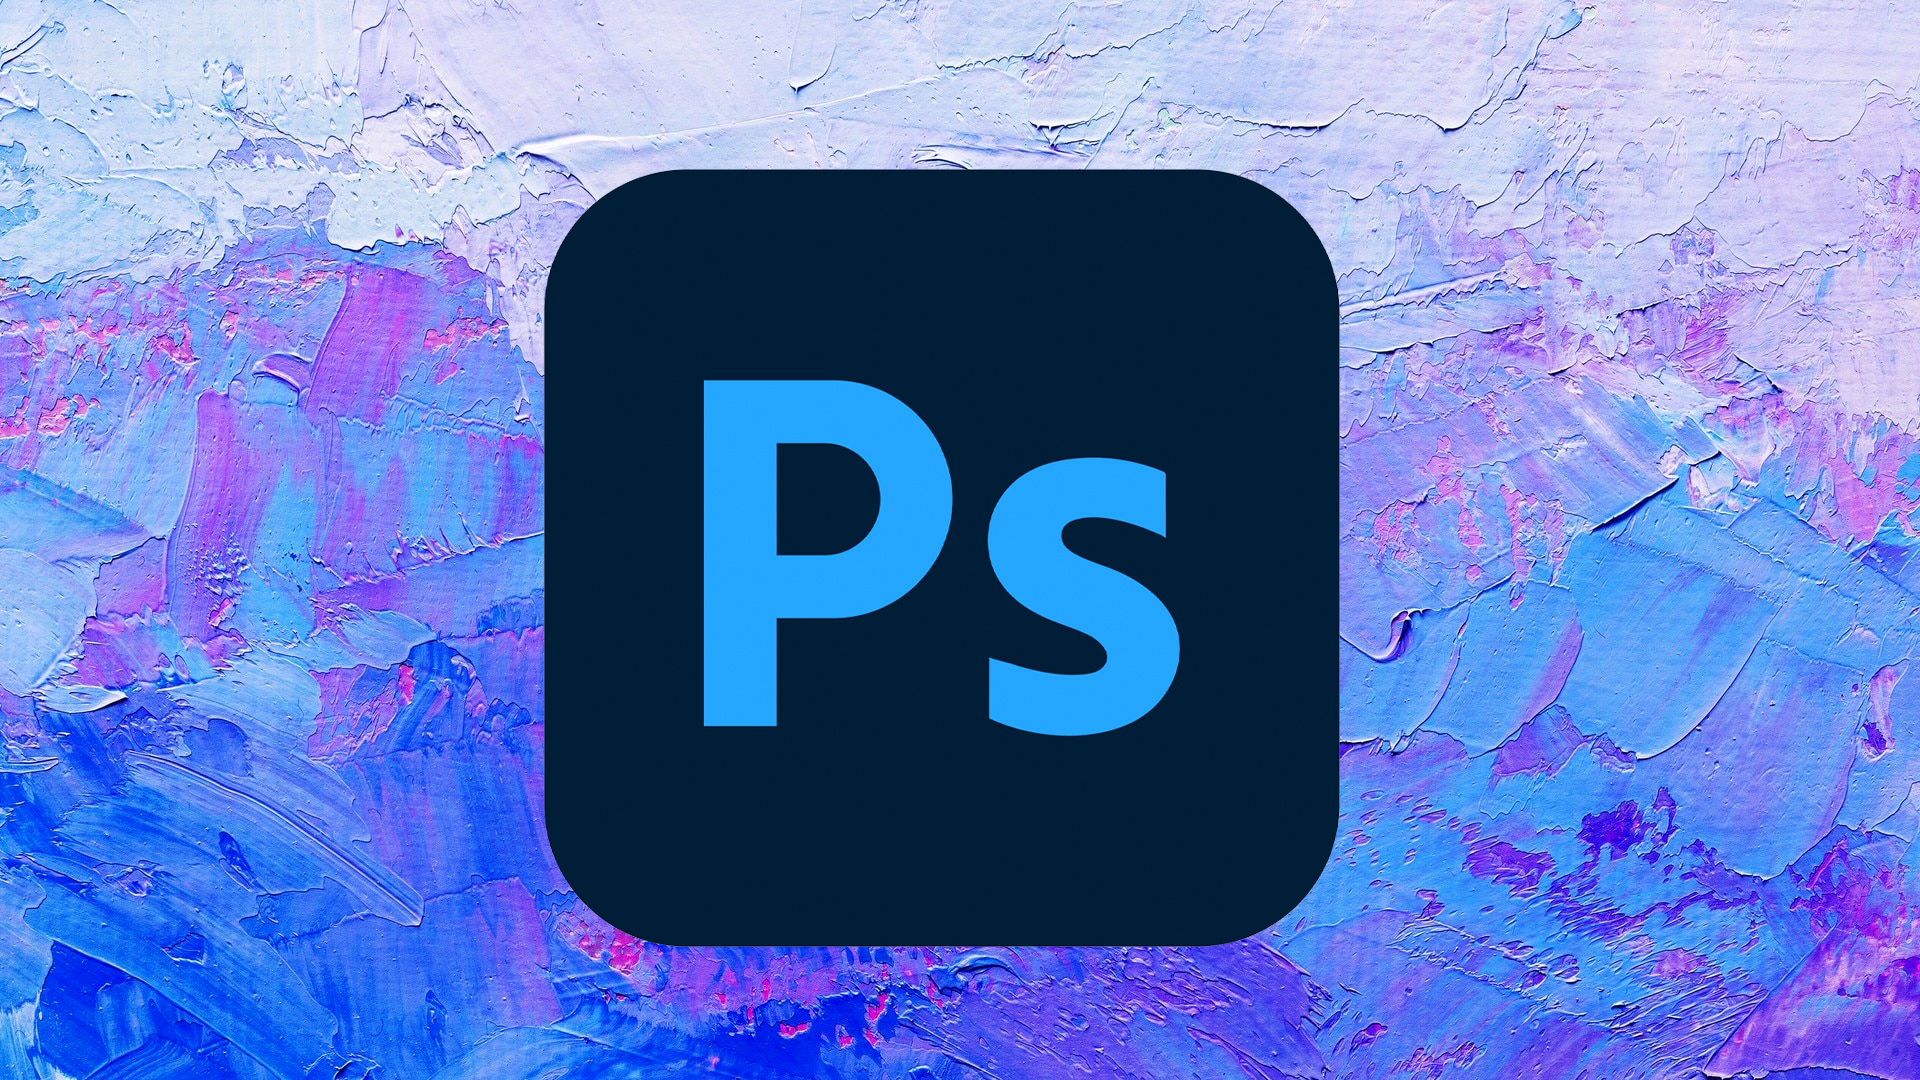 Download Photoshop: get Adobe Photoshop free or with Creative Cloud